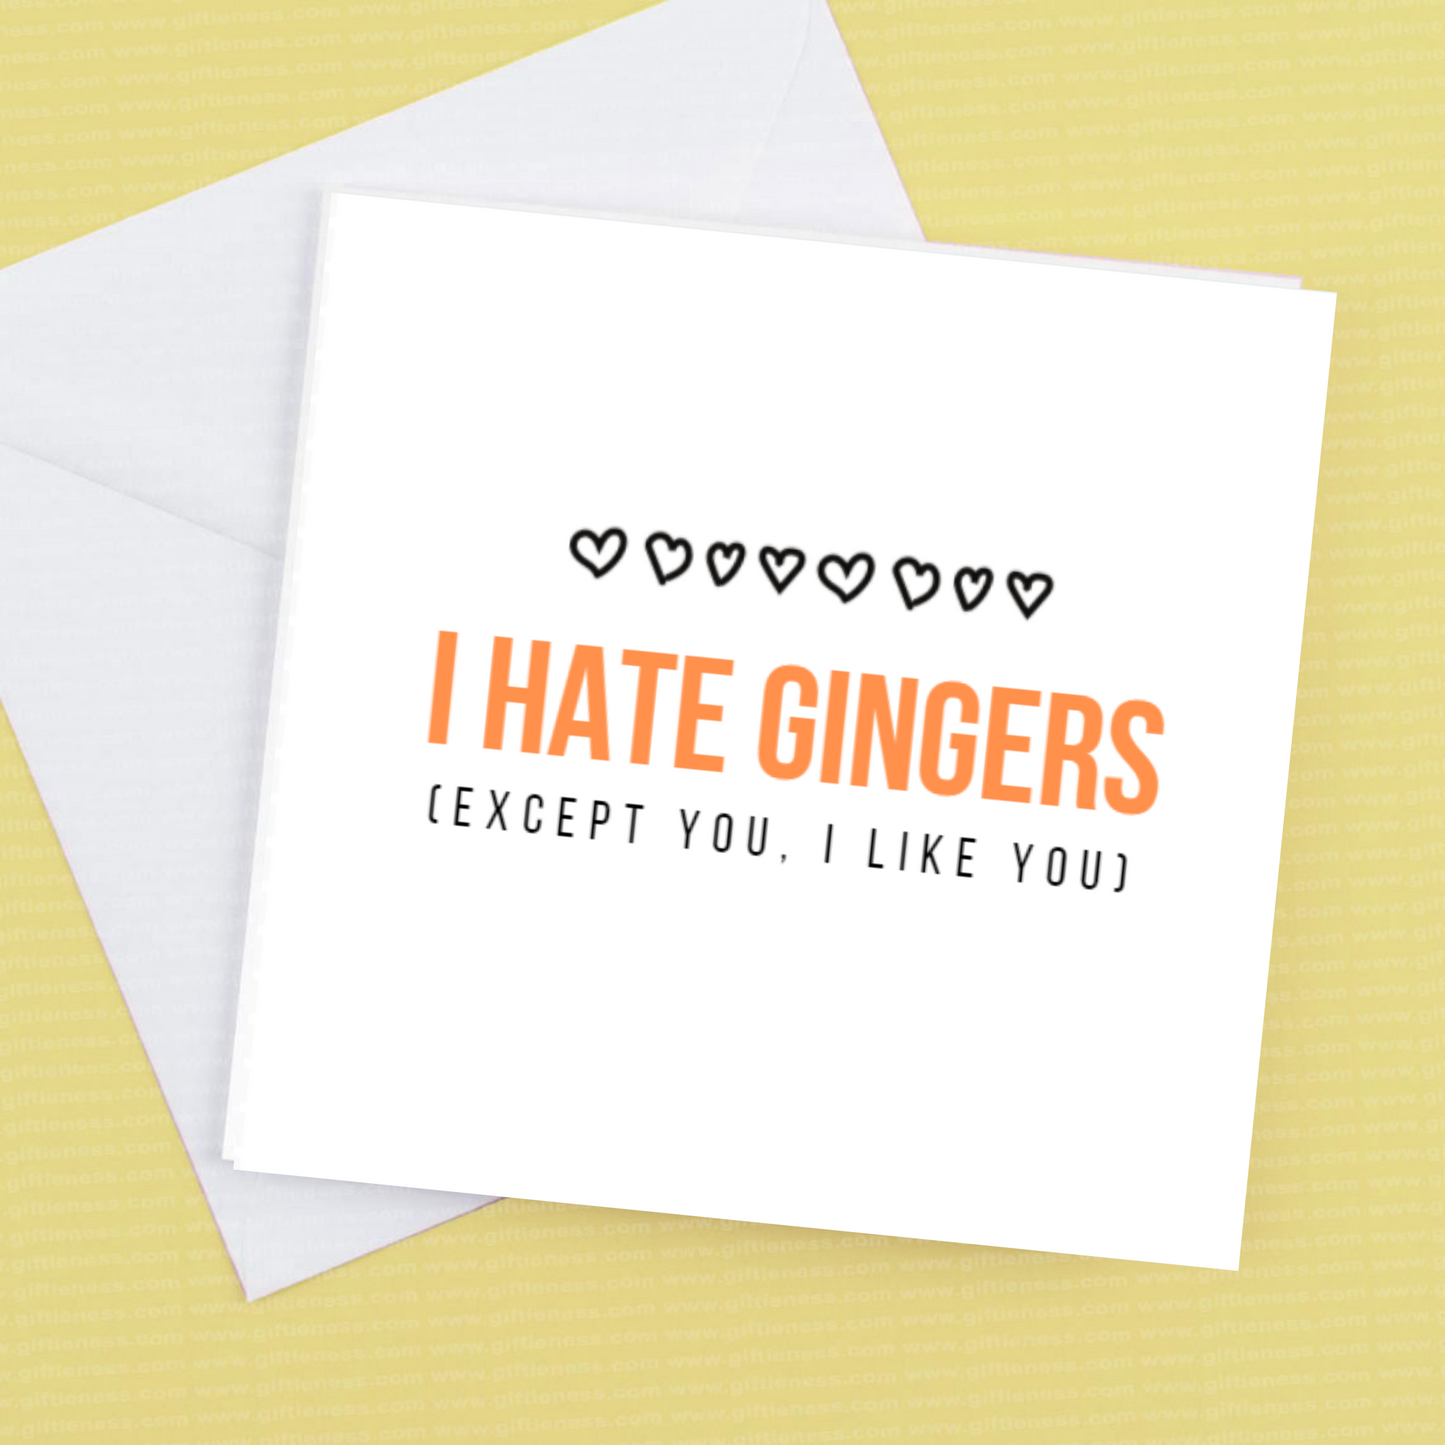 I Hate Gingers - Except You